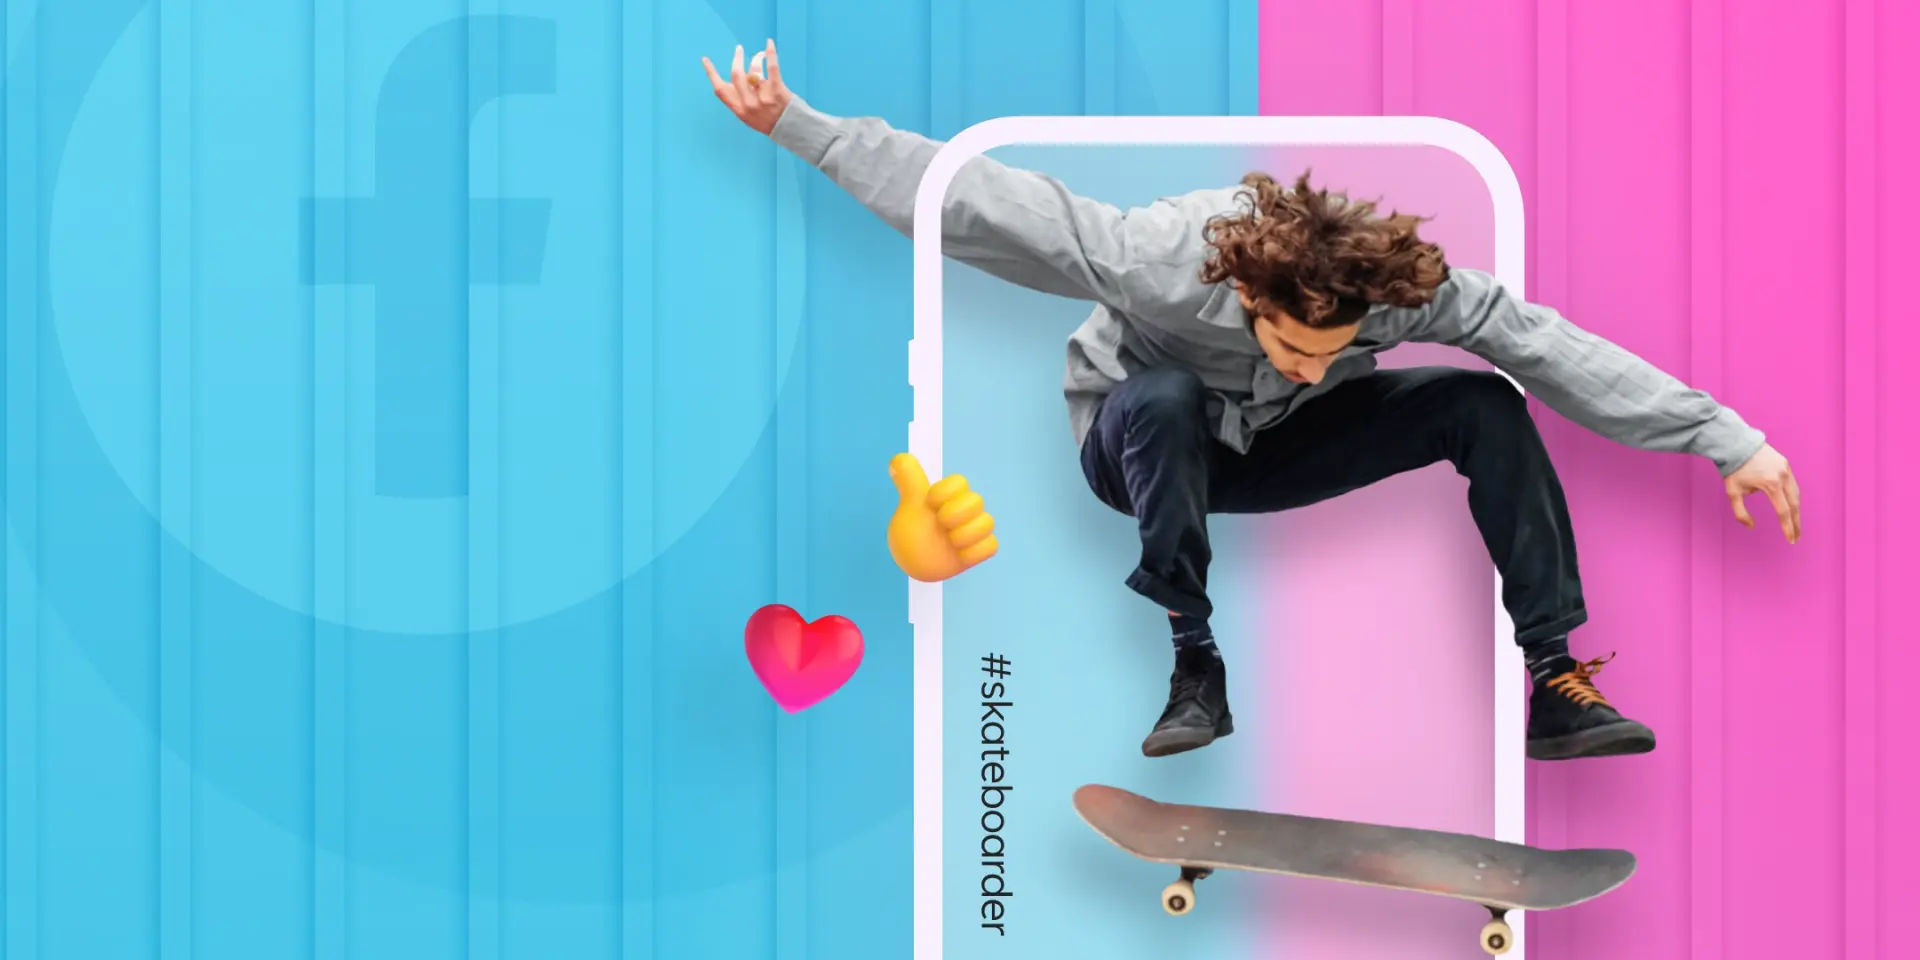 An image of a man with grey sweater doing a skateboard trick, inside of a social media post graphic. 